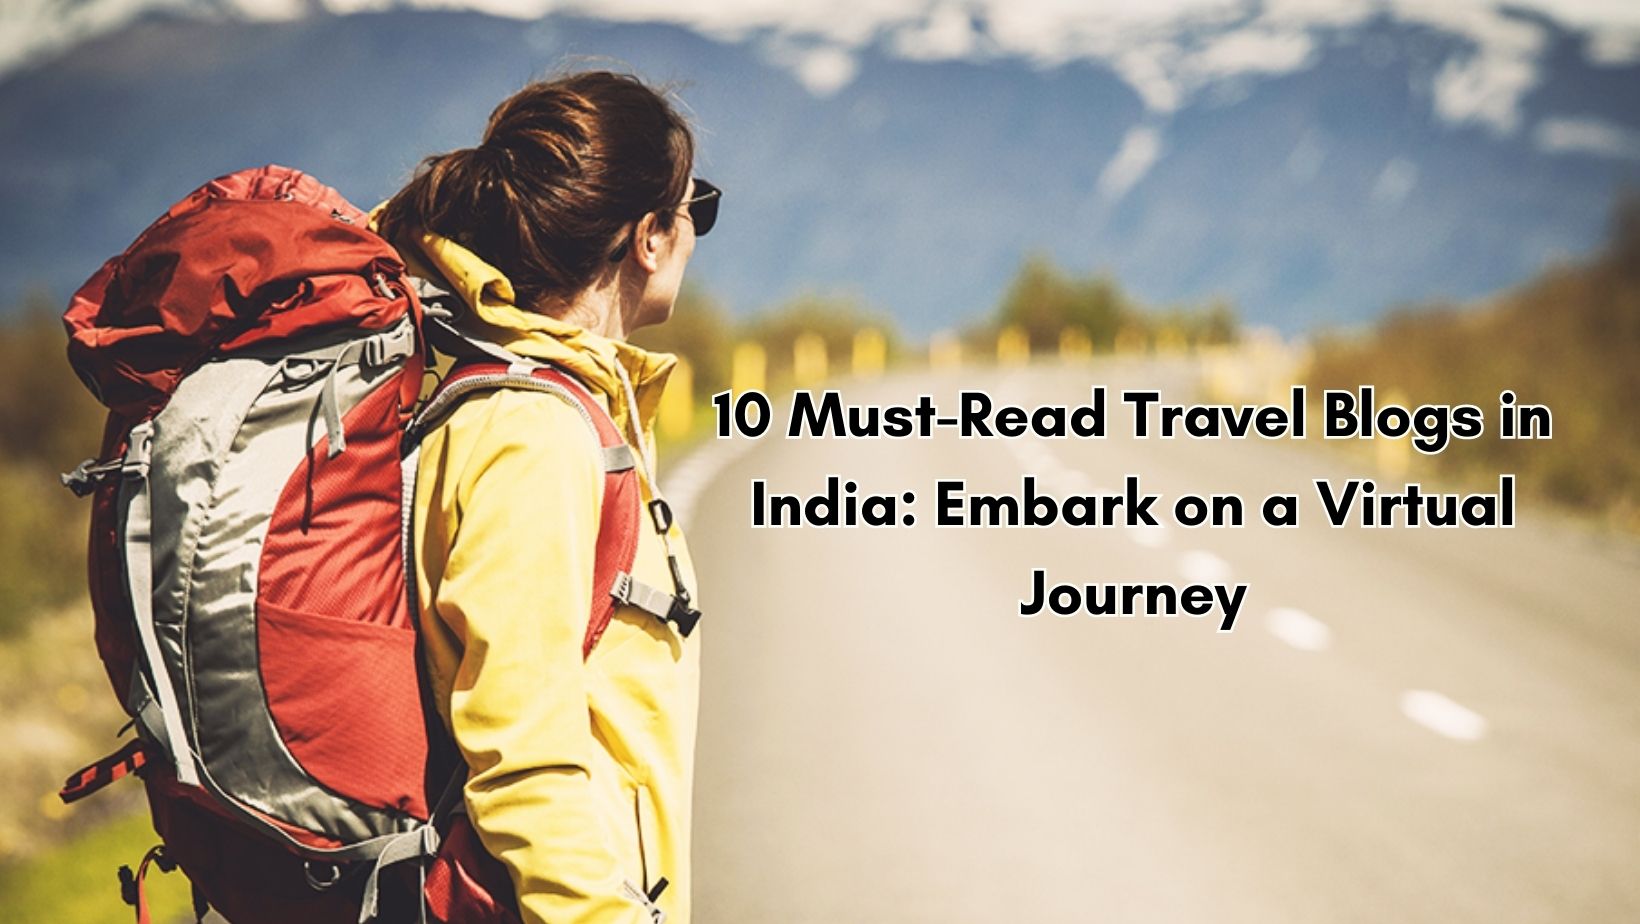 You are currently viewing 10 Must-Read Travel Blogs in India: Embark on a Virtual Journey